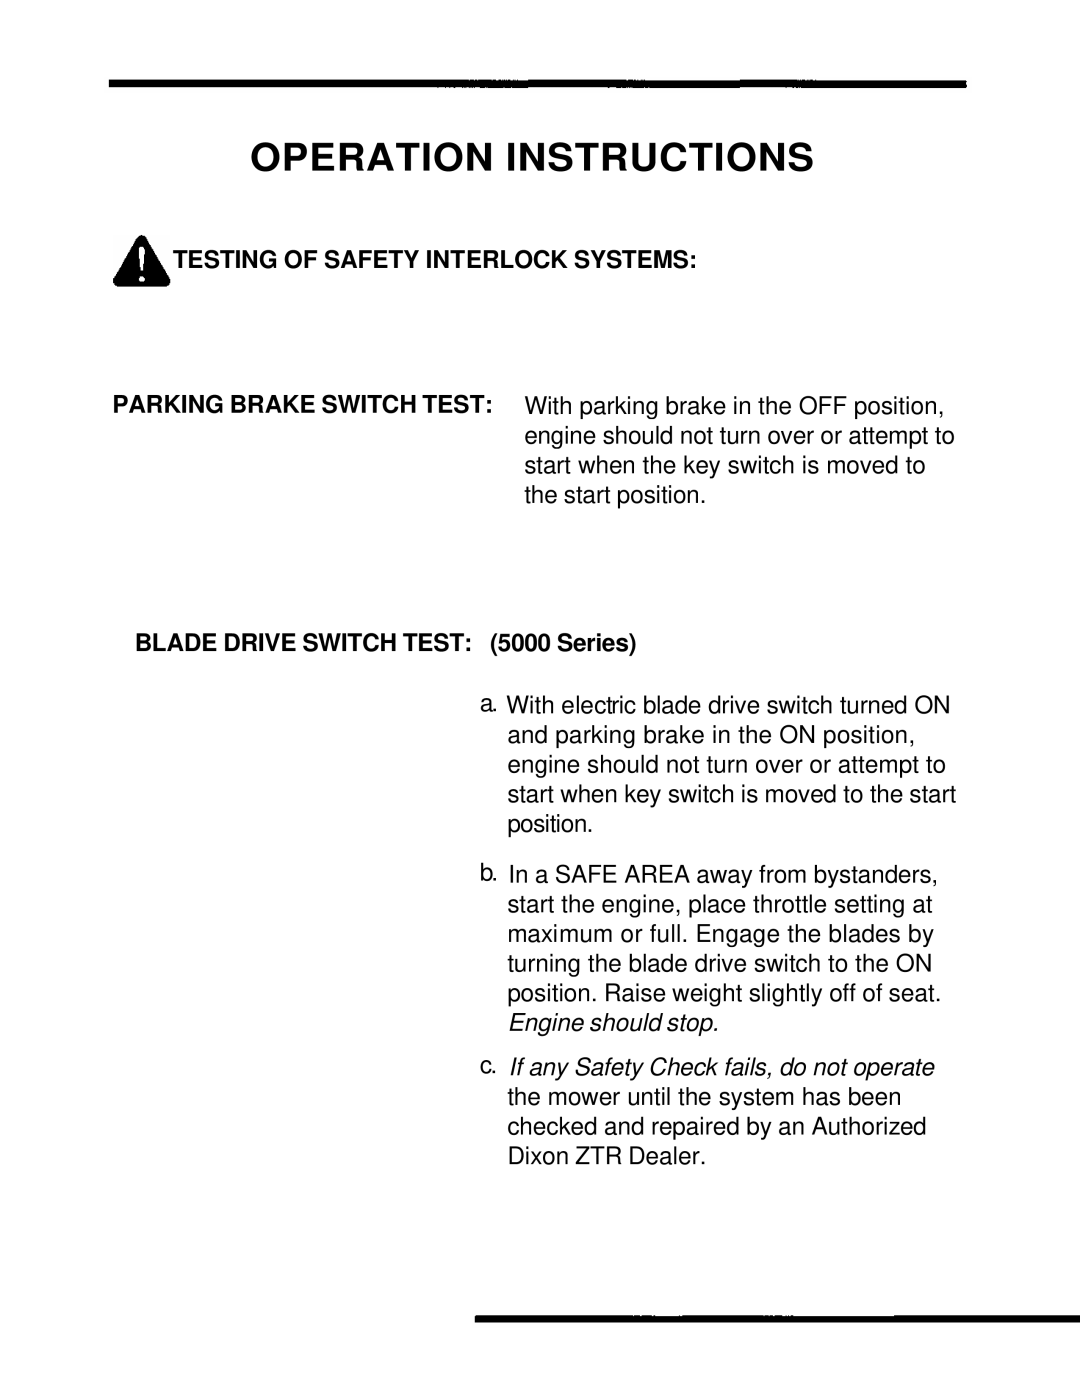 Dixon ZTR 5601, ZTR 5422 Operation Instructions, Testing Of Safety Interlock Systems, BLADE DRIVE SWITCH TEST 5000 Series 